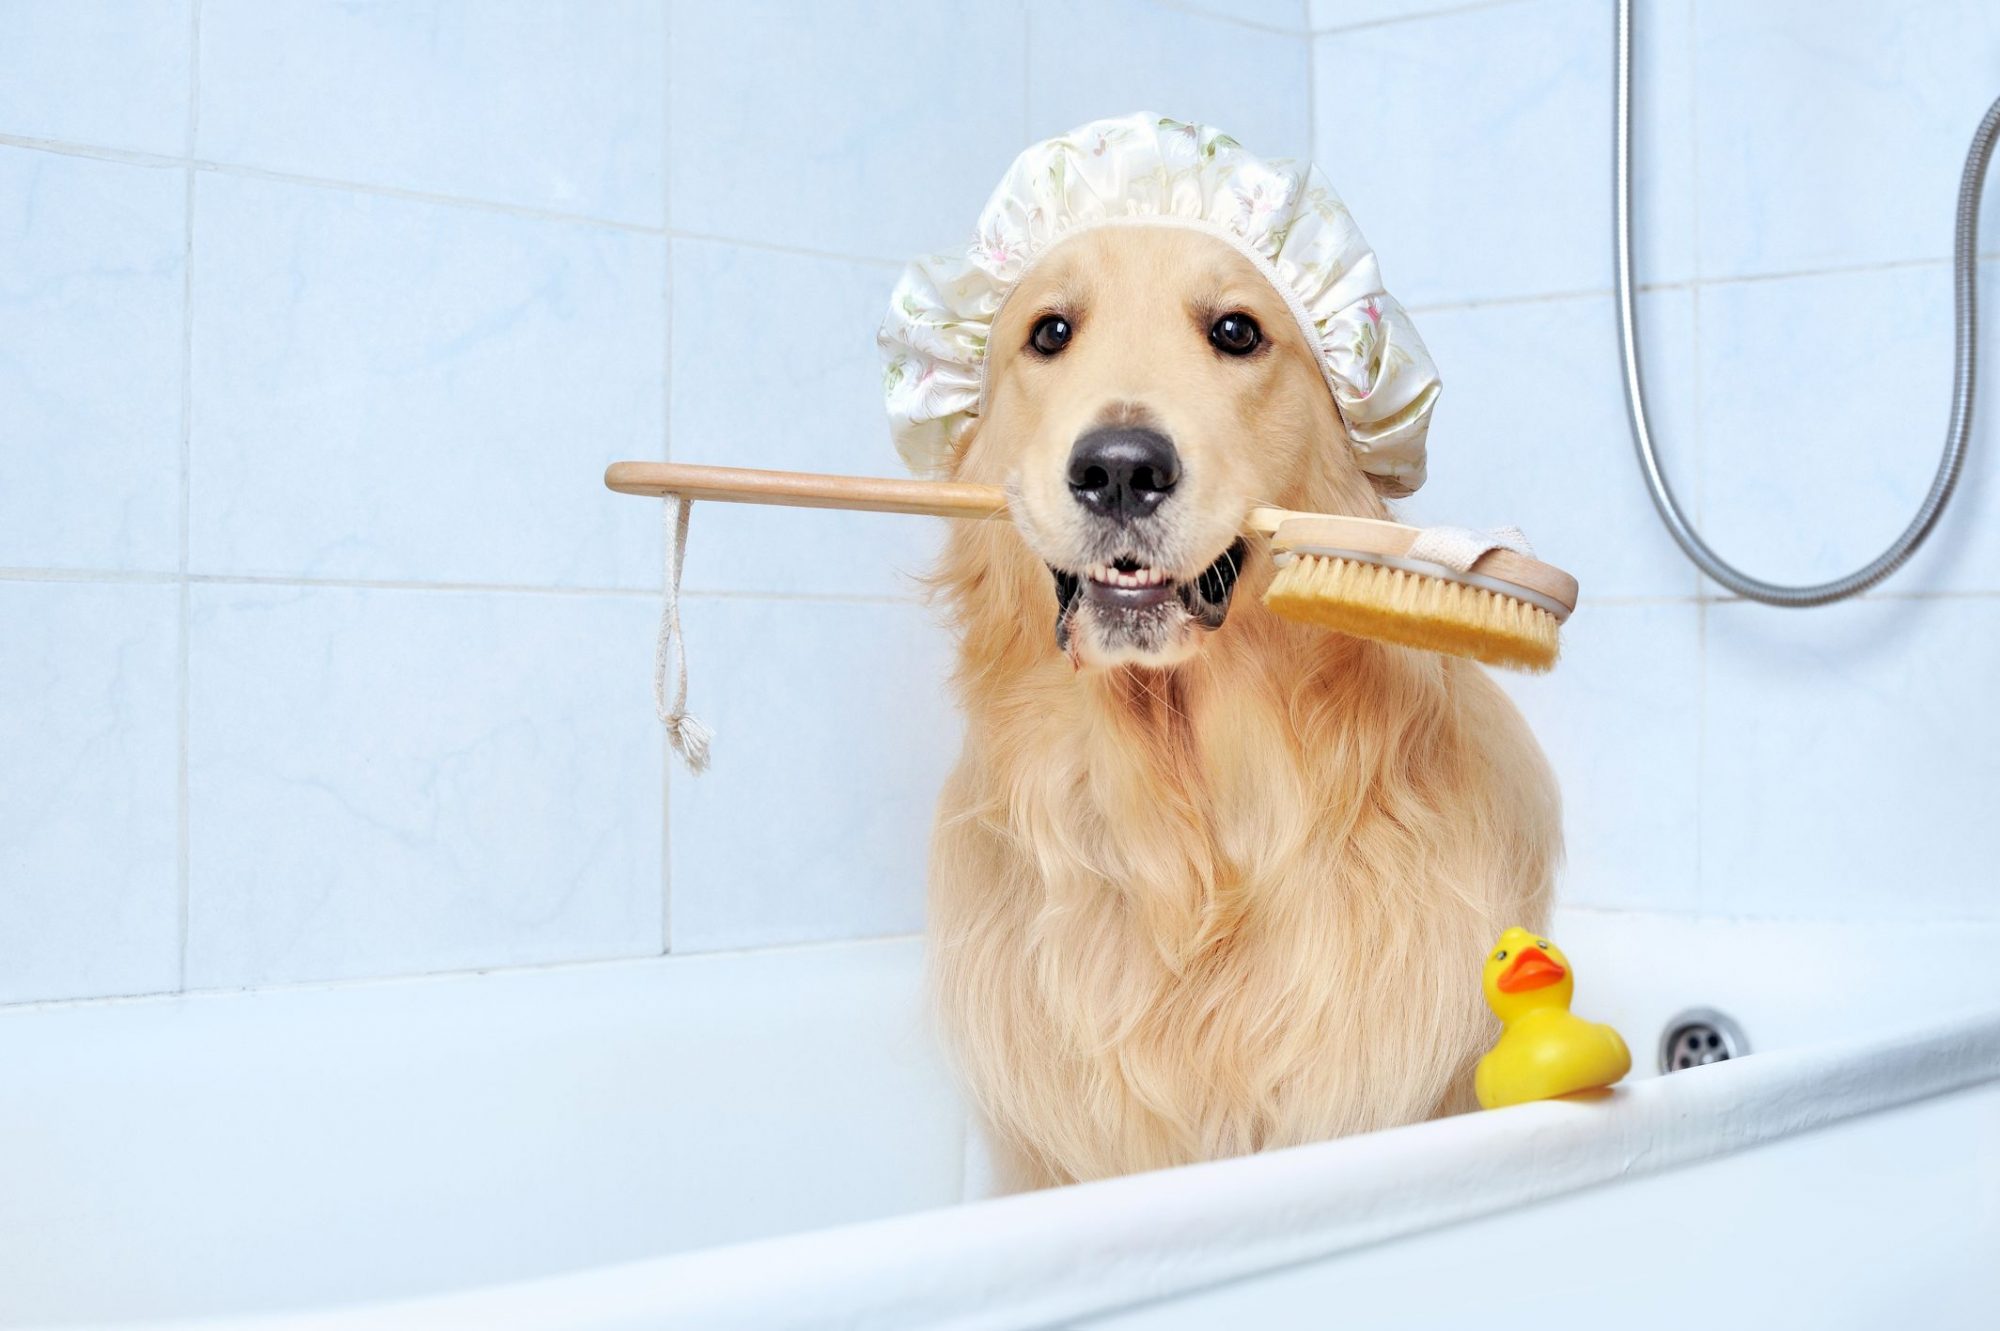 A smelly old dog is taking a bath to help eliminate the odor.